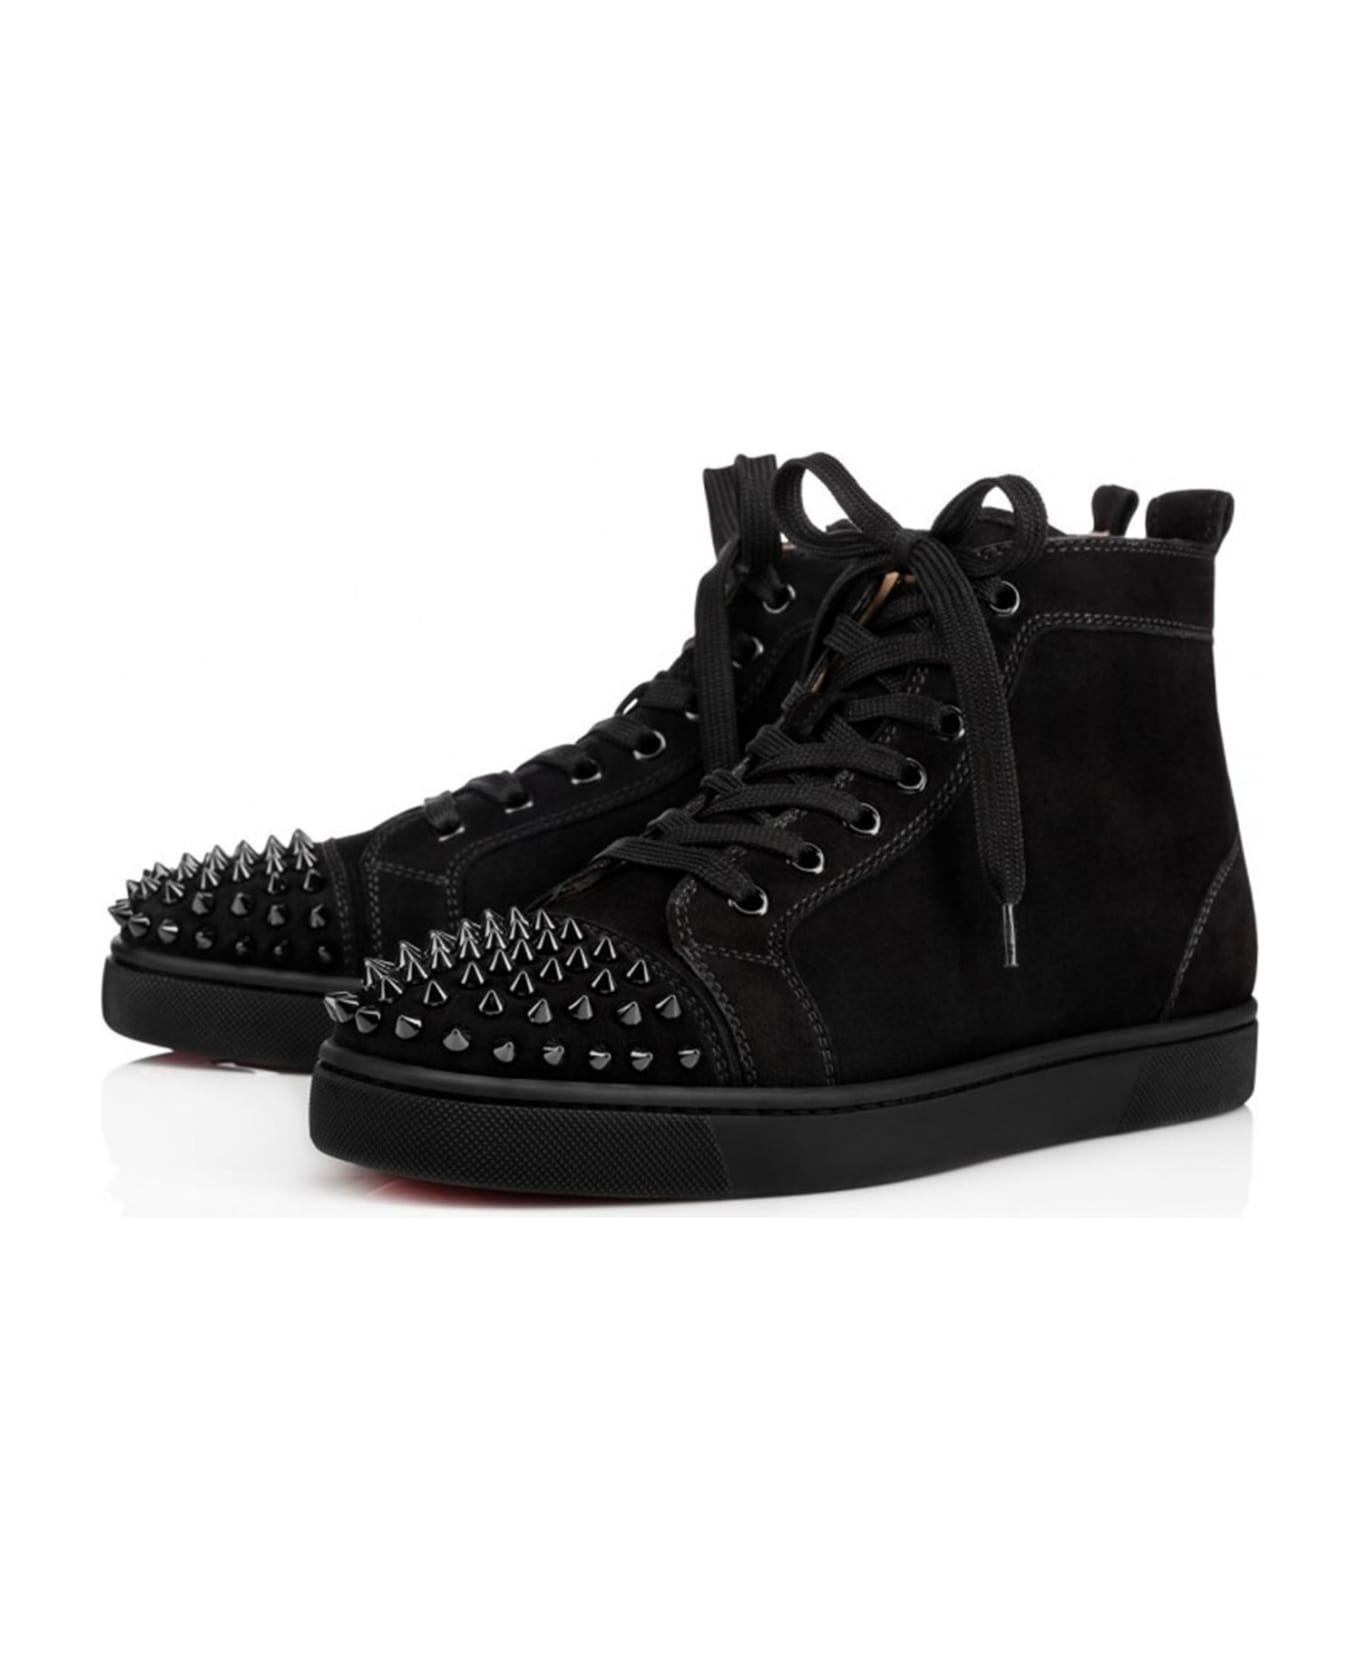 Christian Louboutin High-top Sneakers In Suede With Spikes - Black/black/bk スニーカー